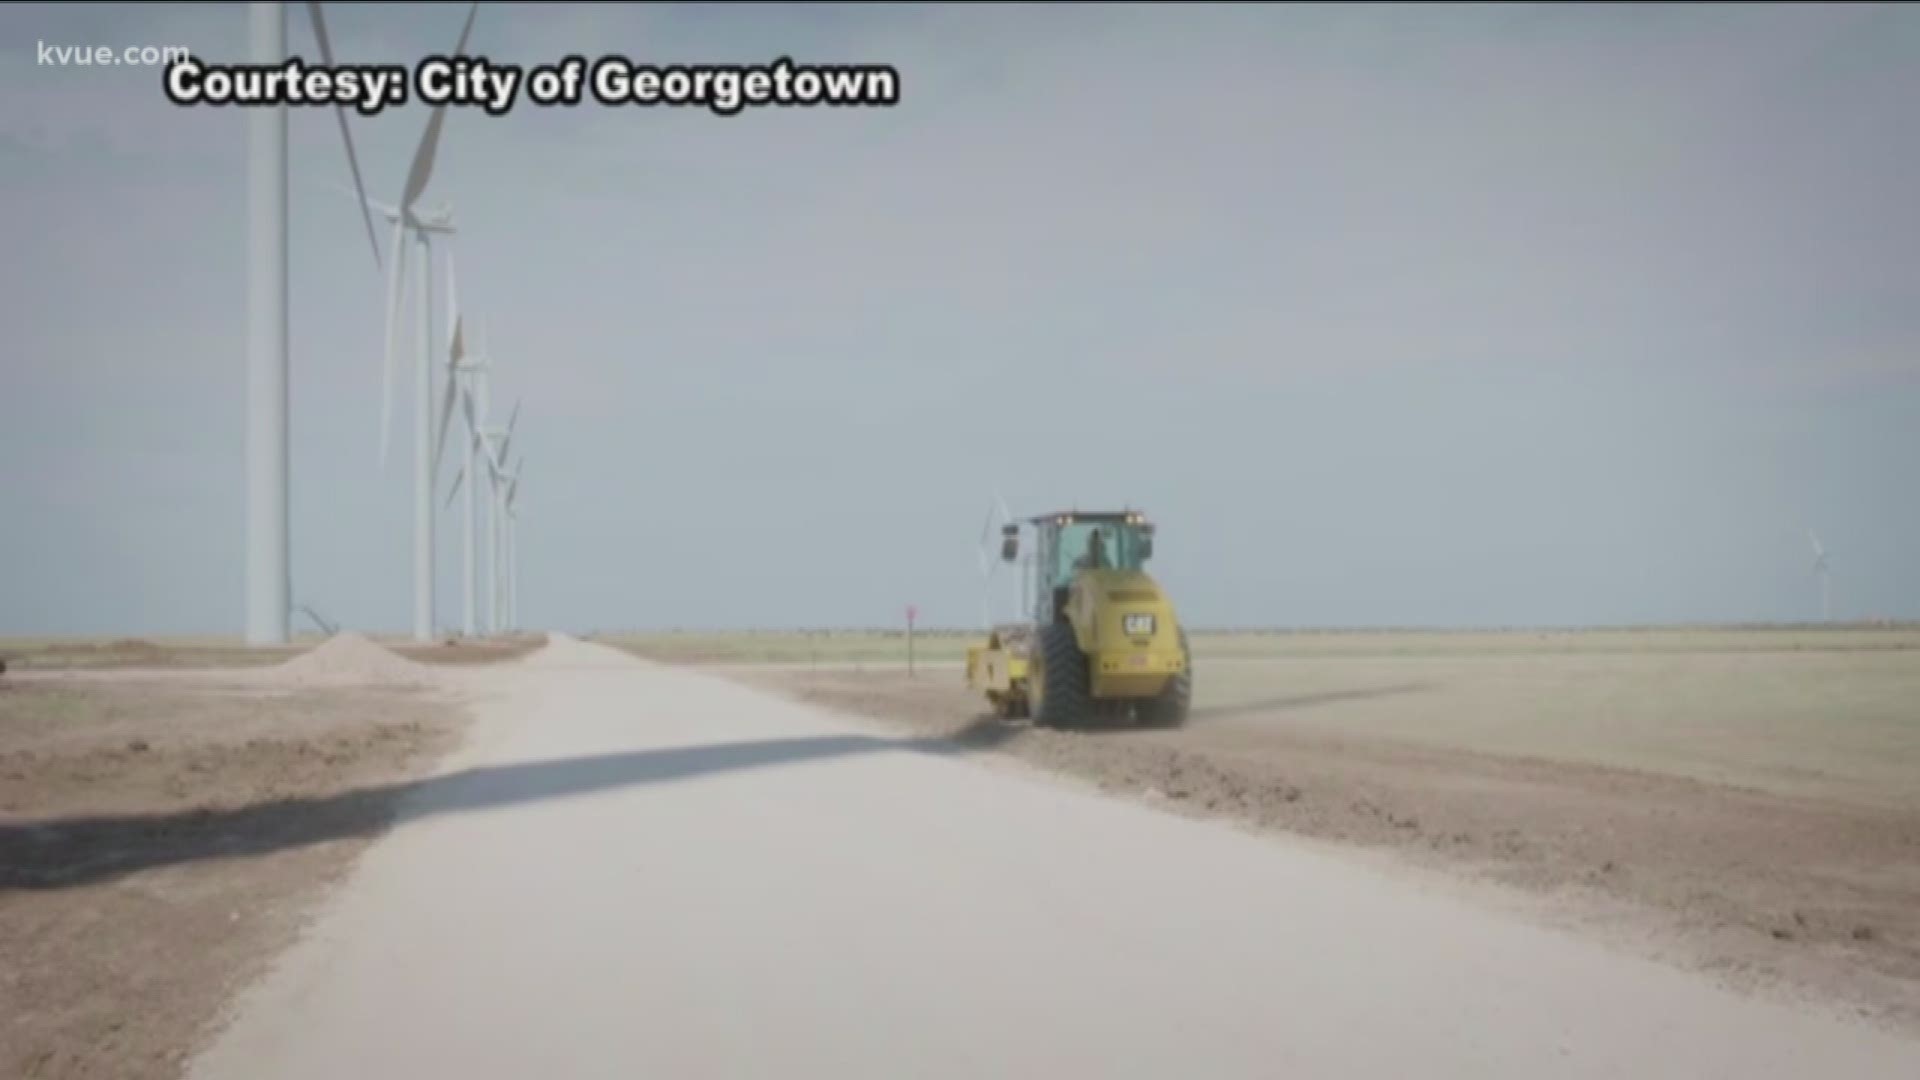 The City of Georgetown is taking an energy company to court to try to get out of a 25-year contract.